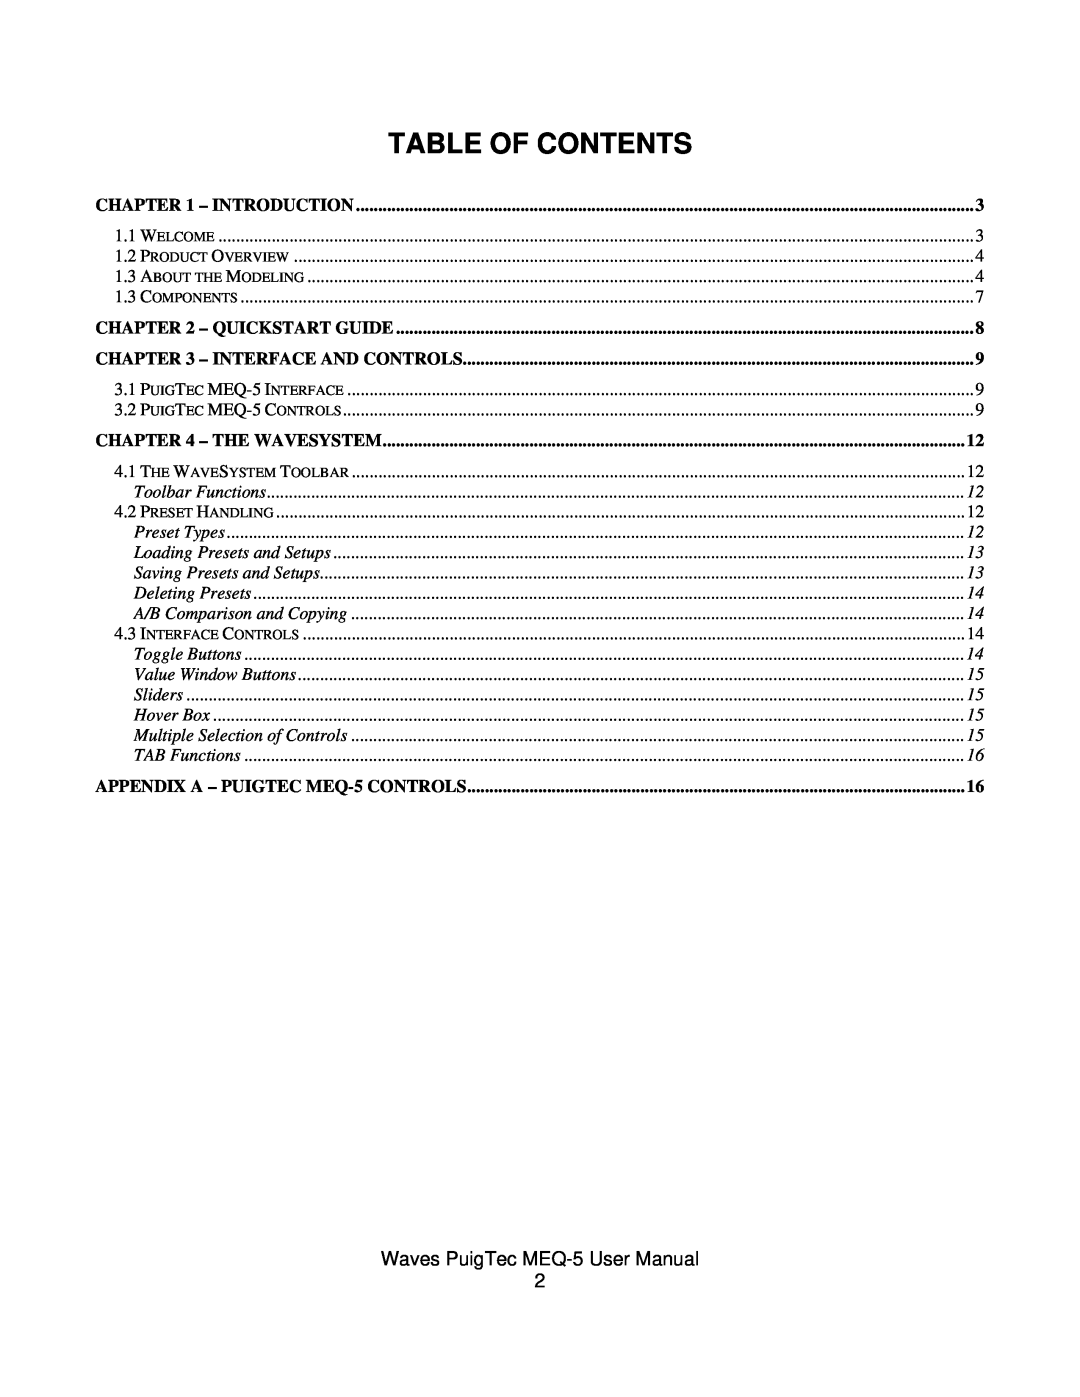 Waves MEQ-5 user manual Table Of Contents 